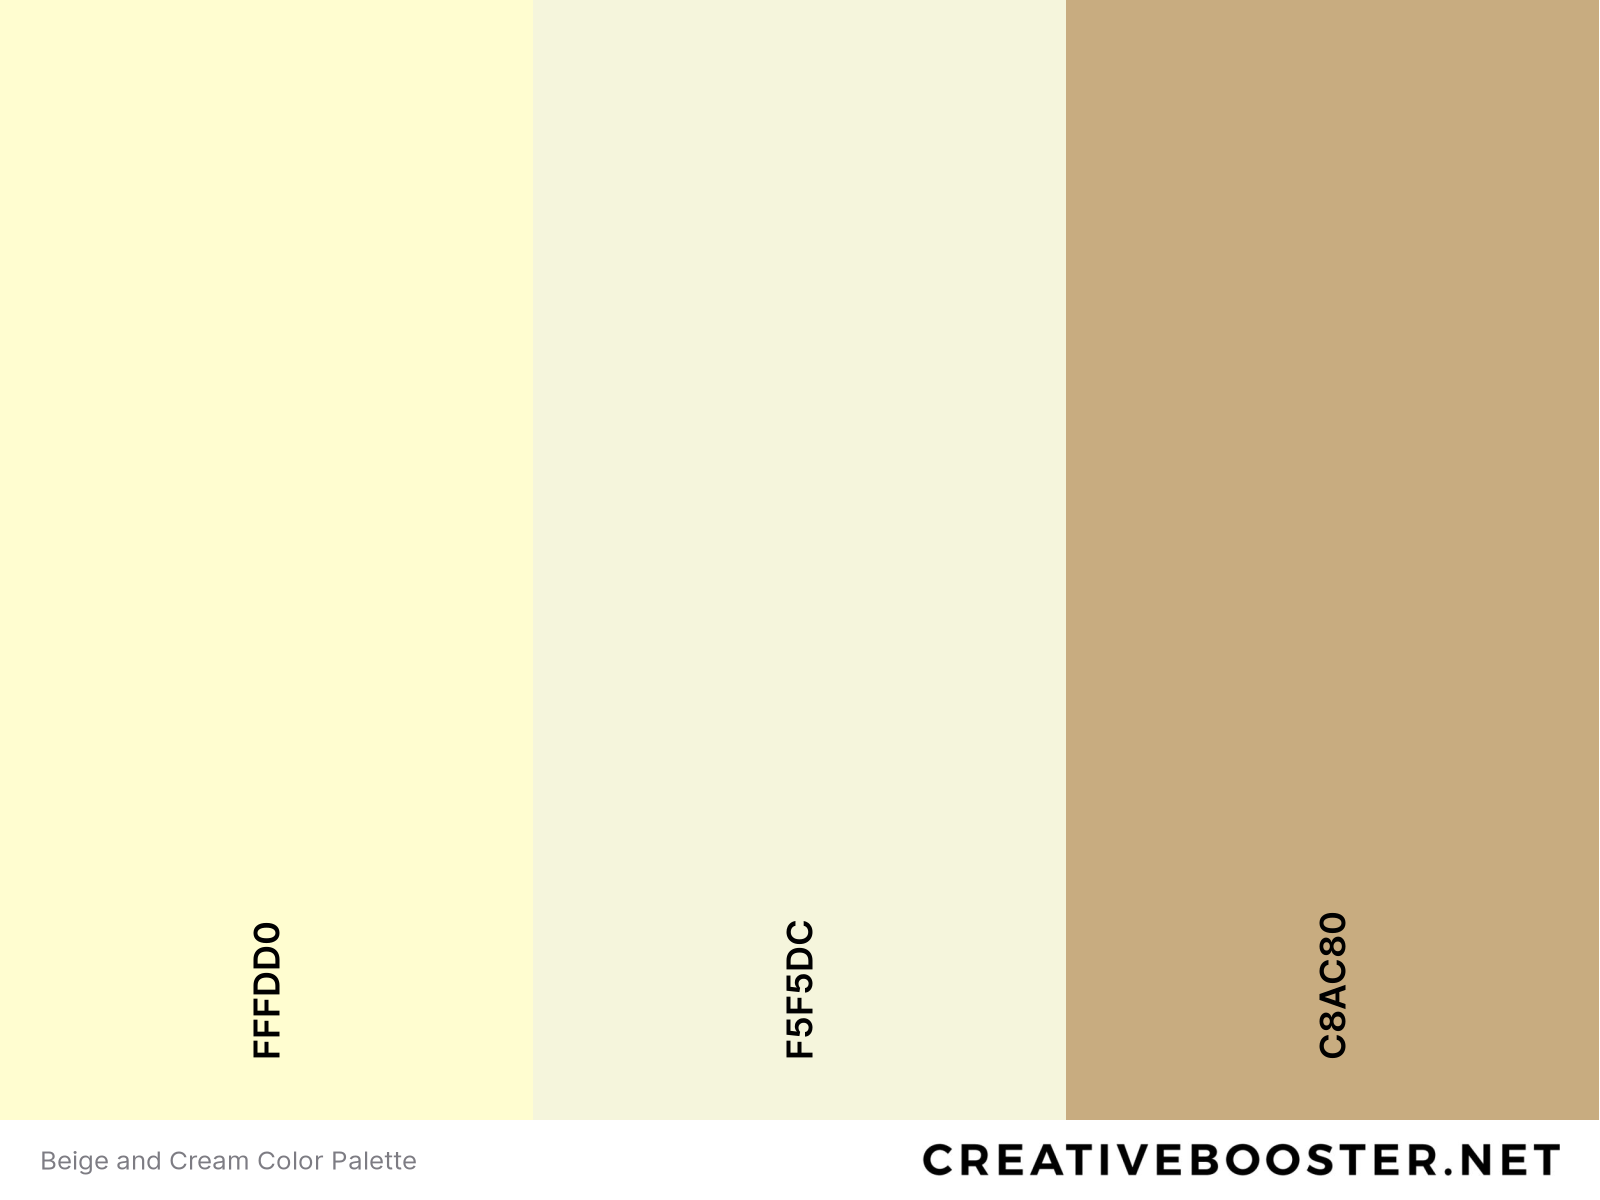 Beige and Cream Color Palette